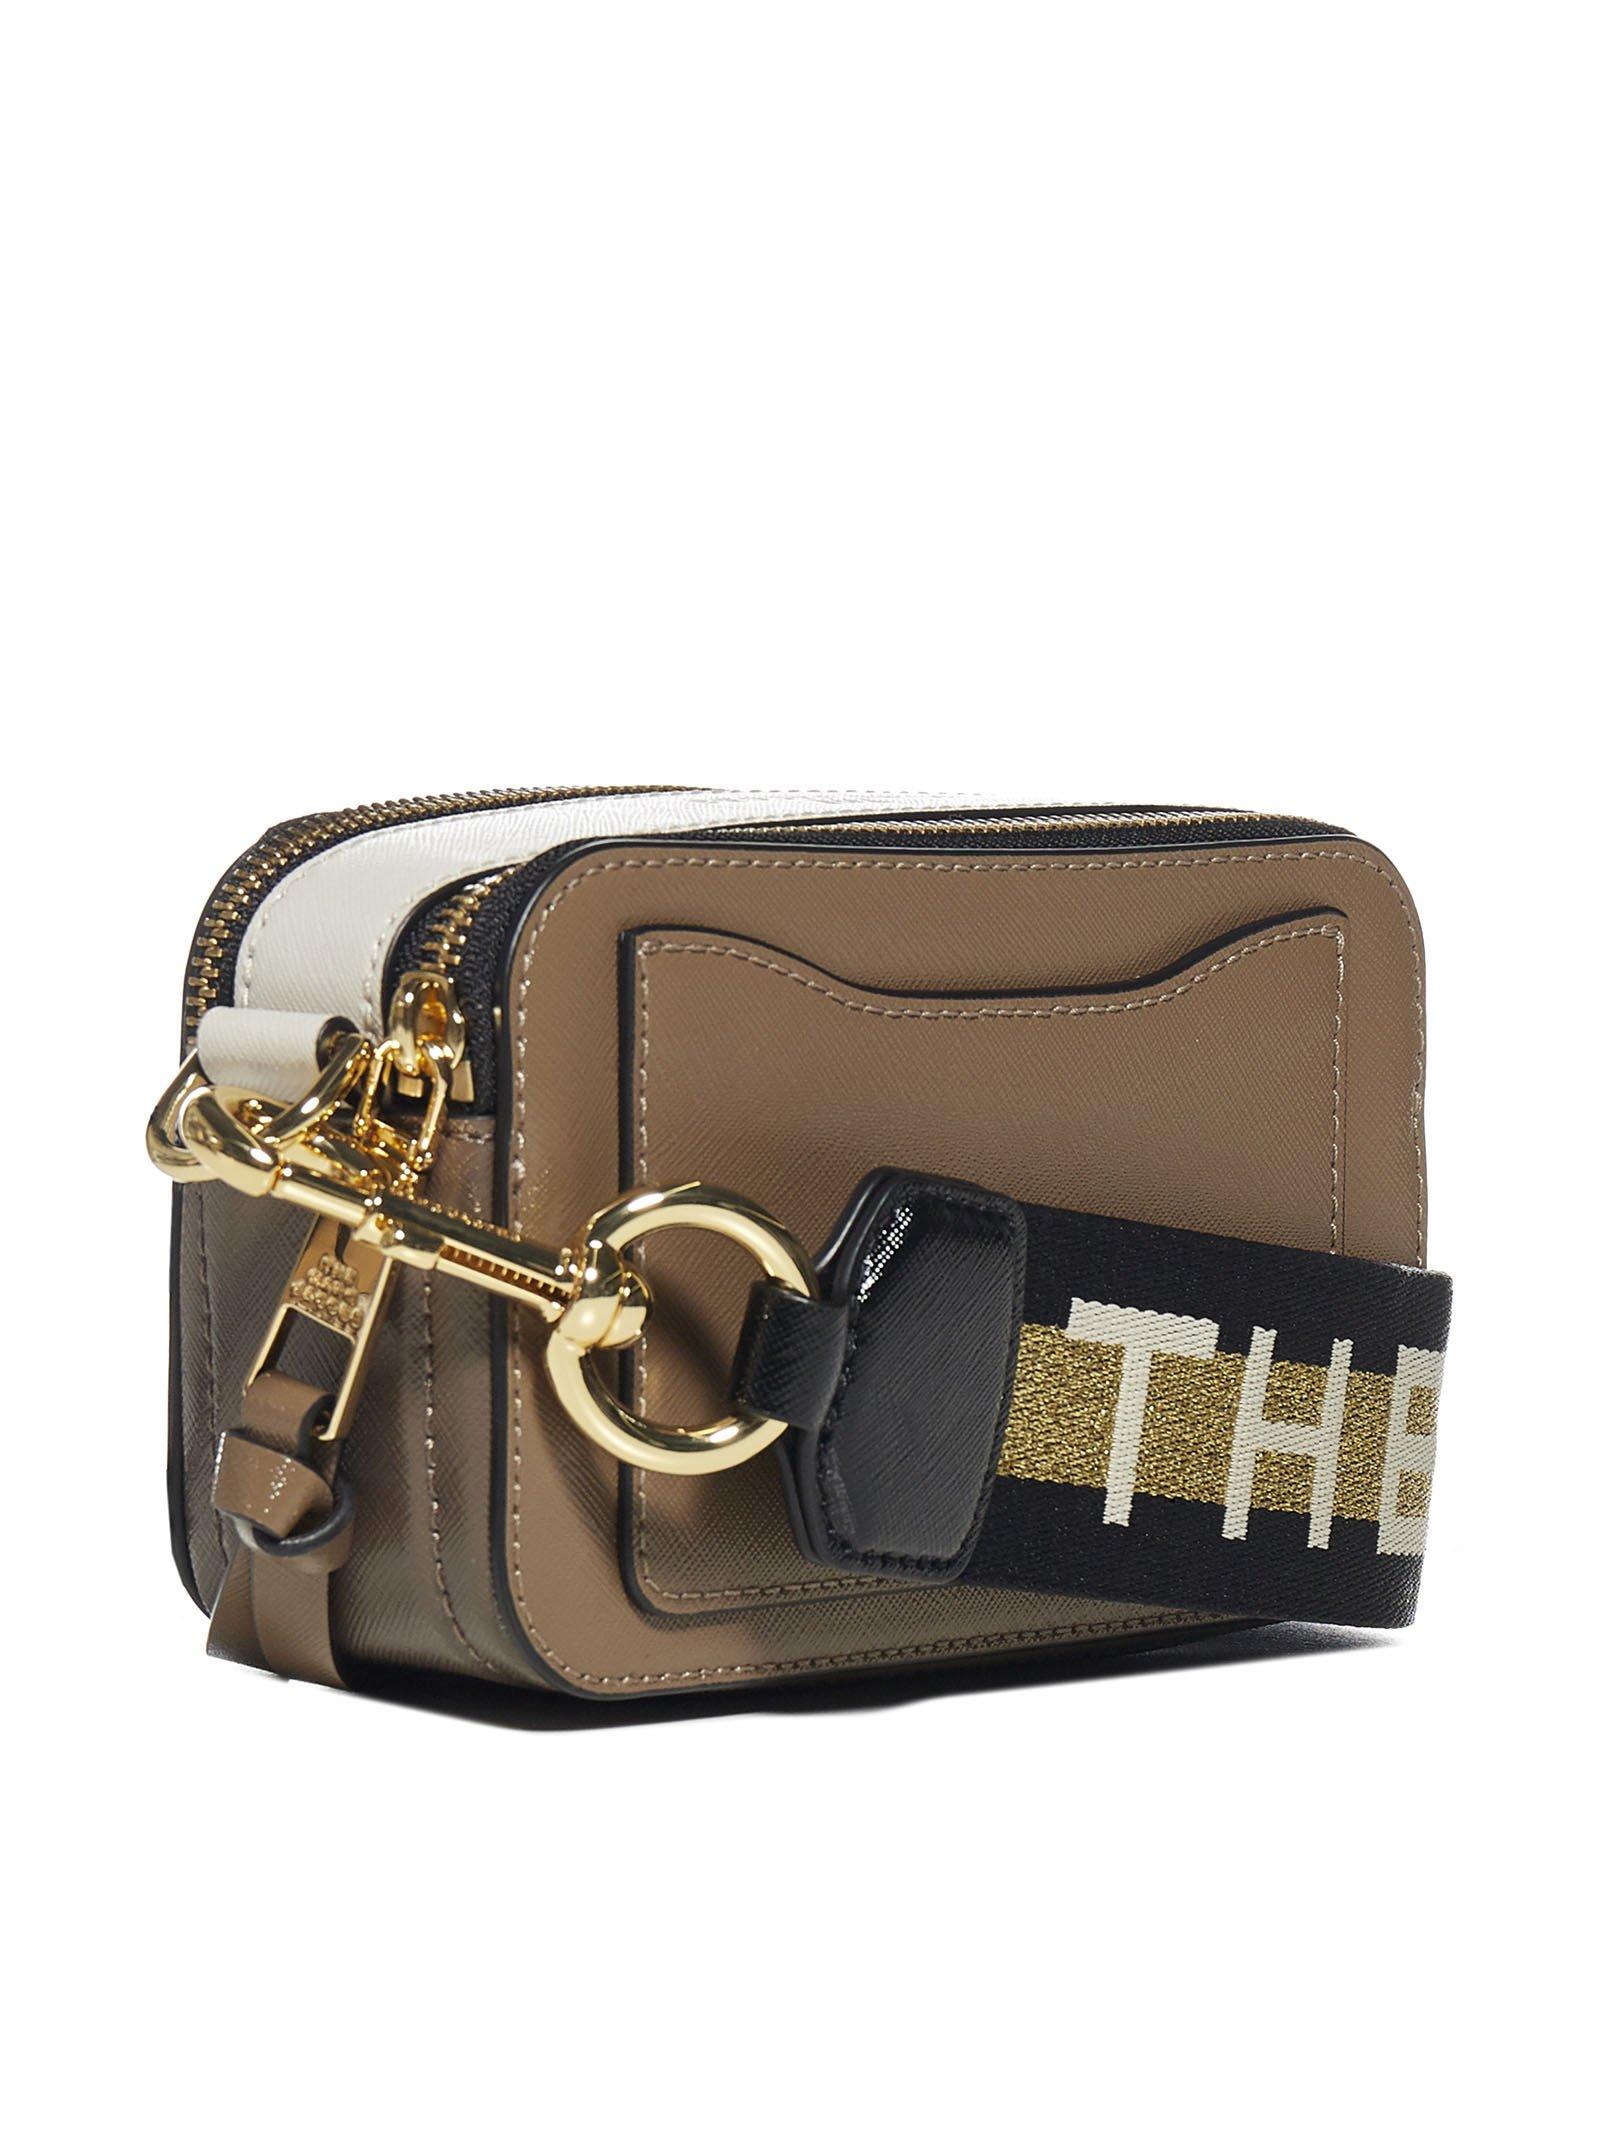 Marc Jacobs Leather The Logo Strap Snapshot Crossbody Bag in Brown - Lyst